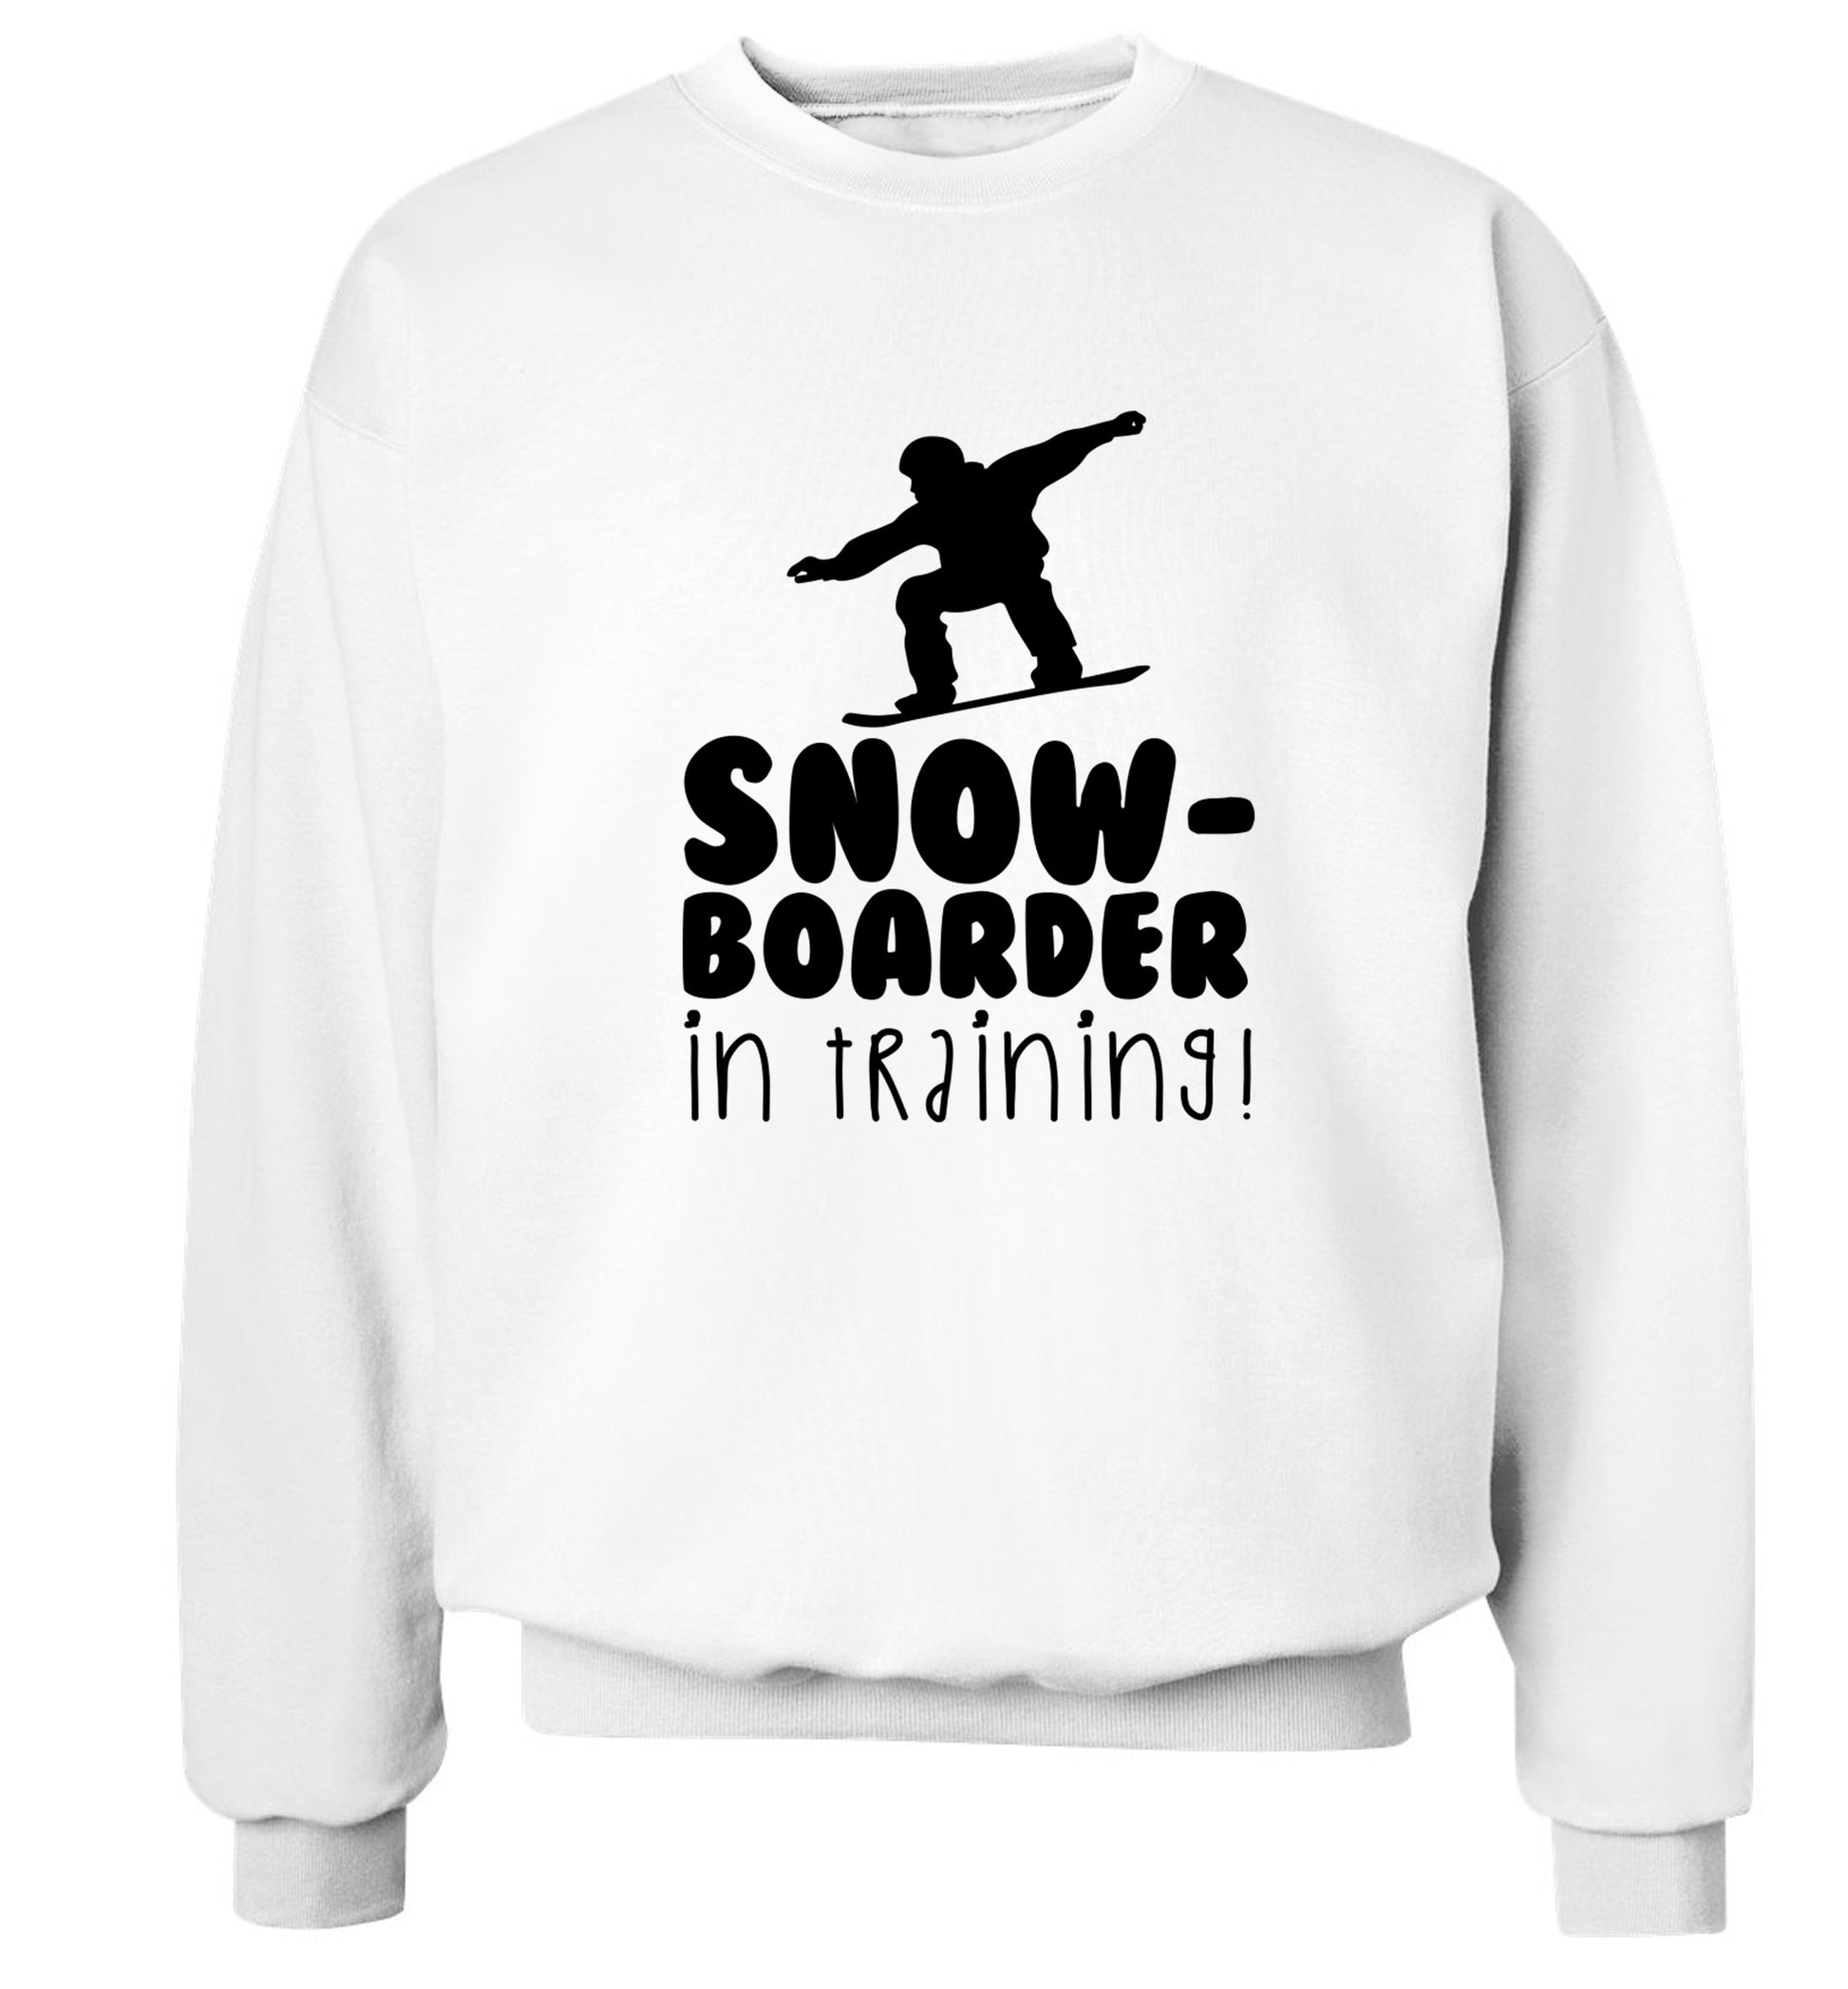 Snowboarder in training Adult's unisex white Sweater 2XL